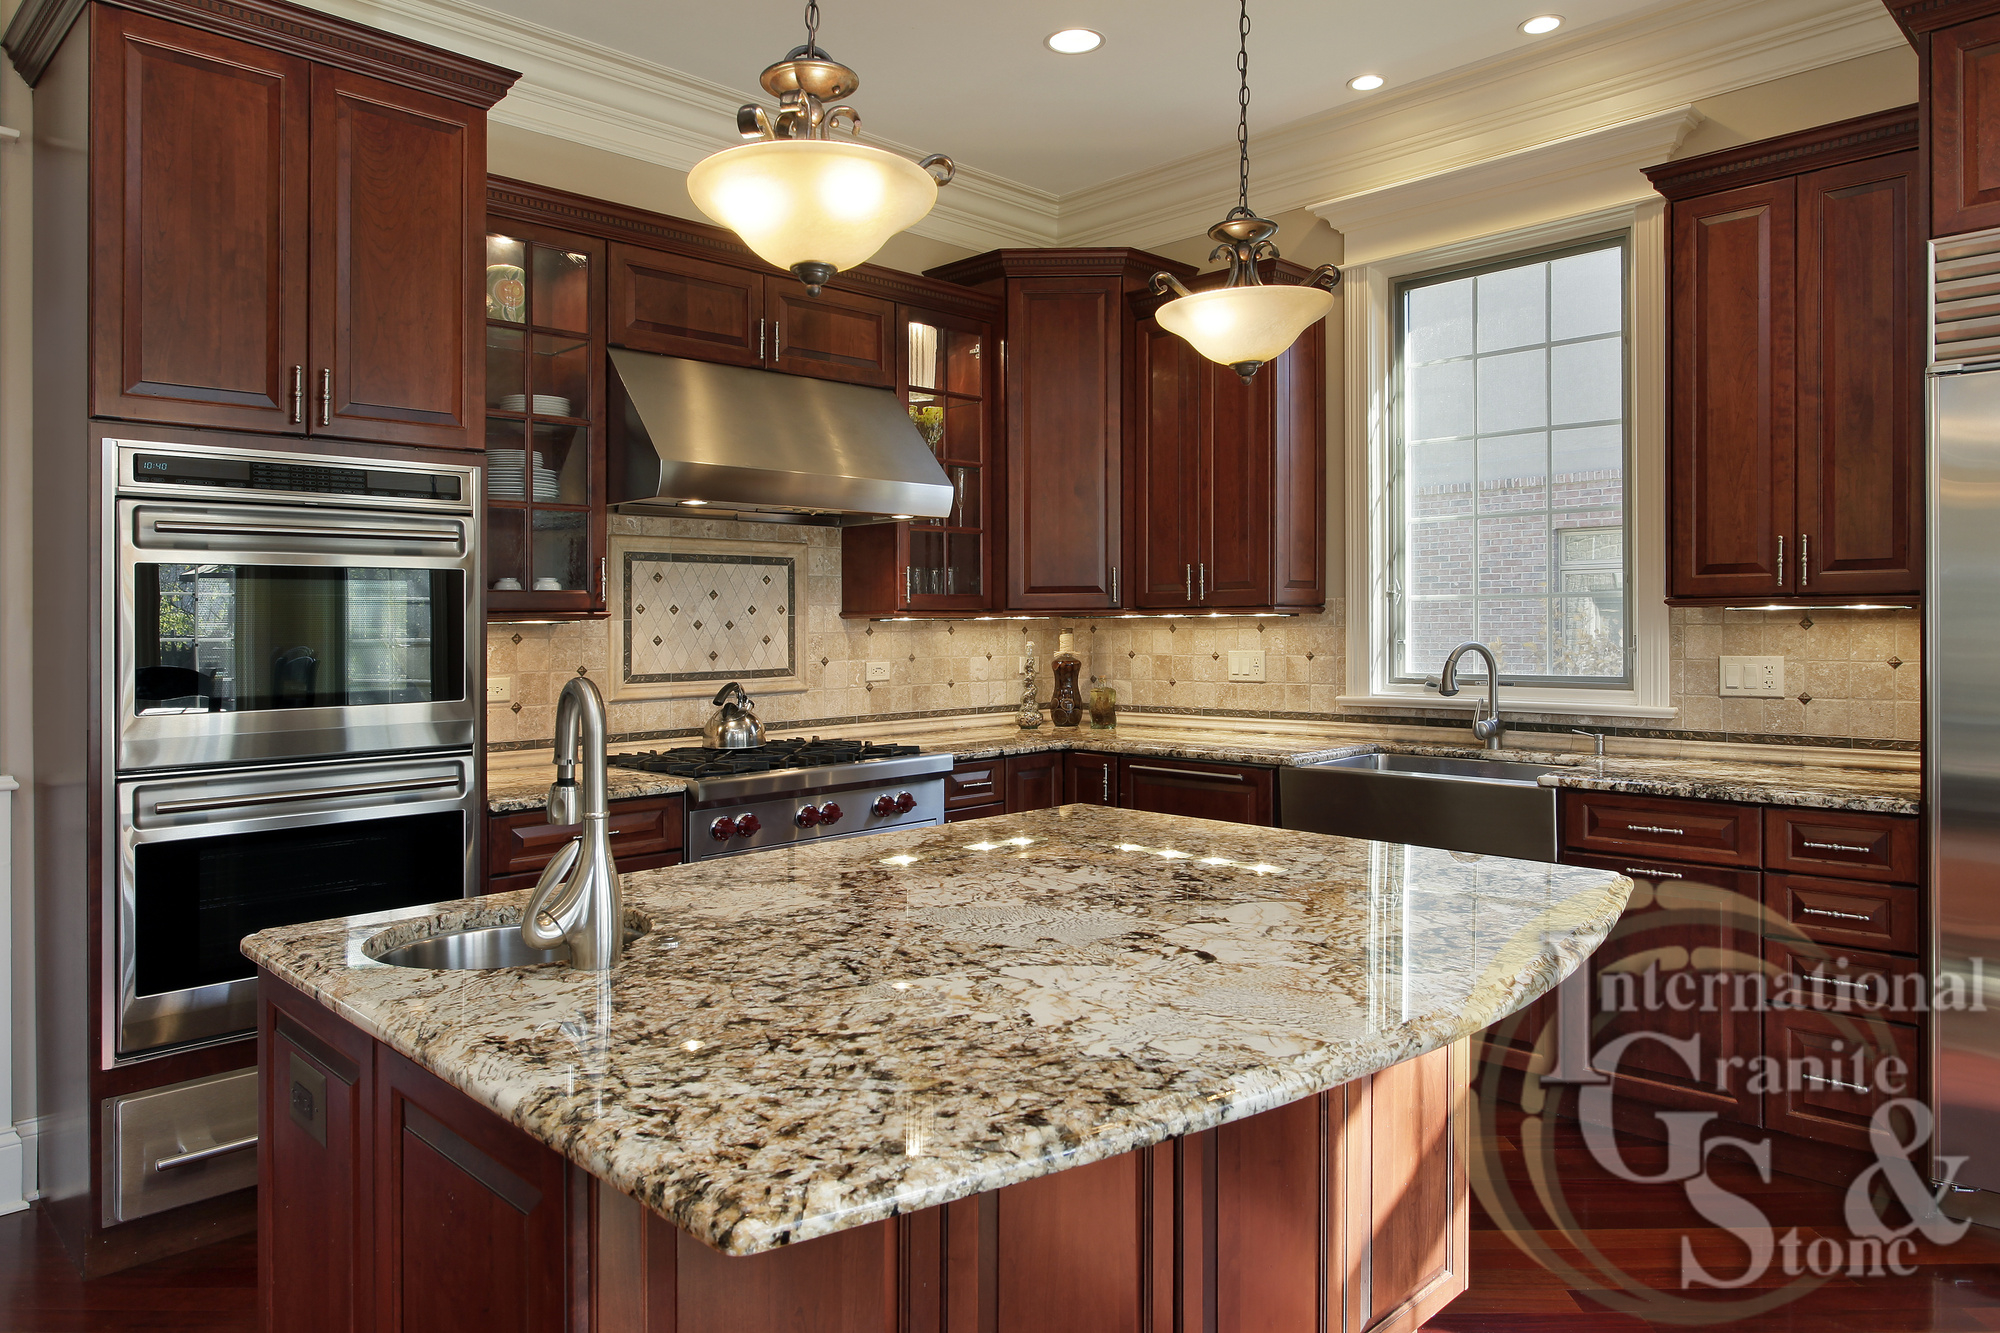 What Is The Cost Of Granite Installation?